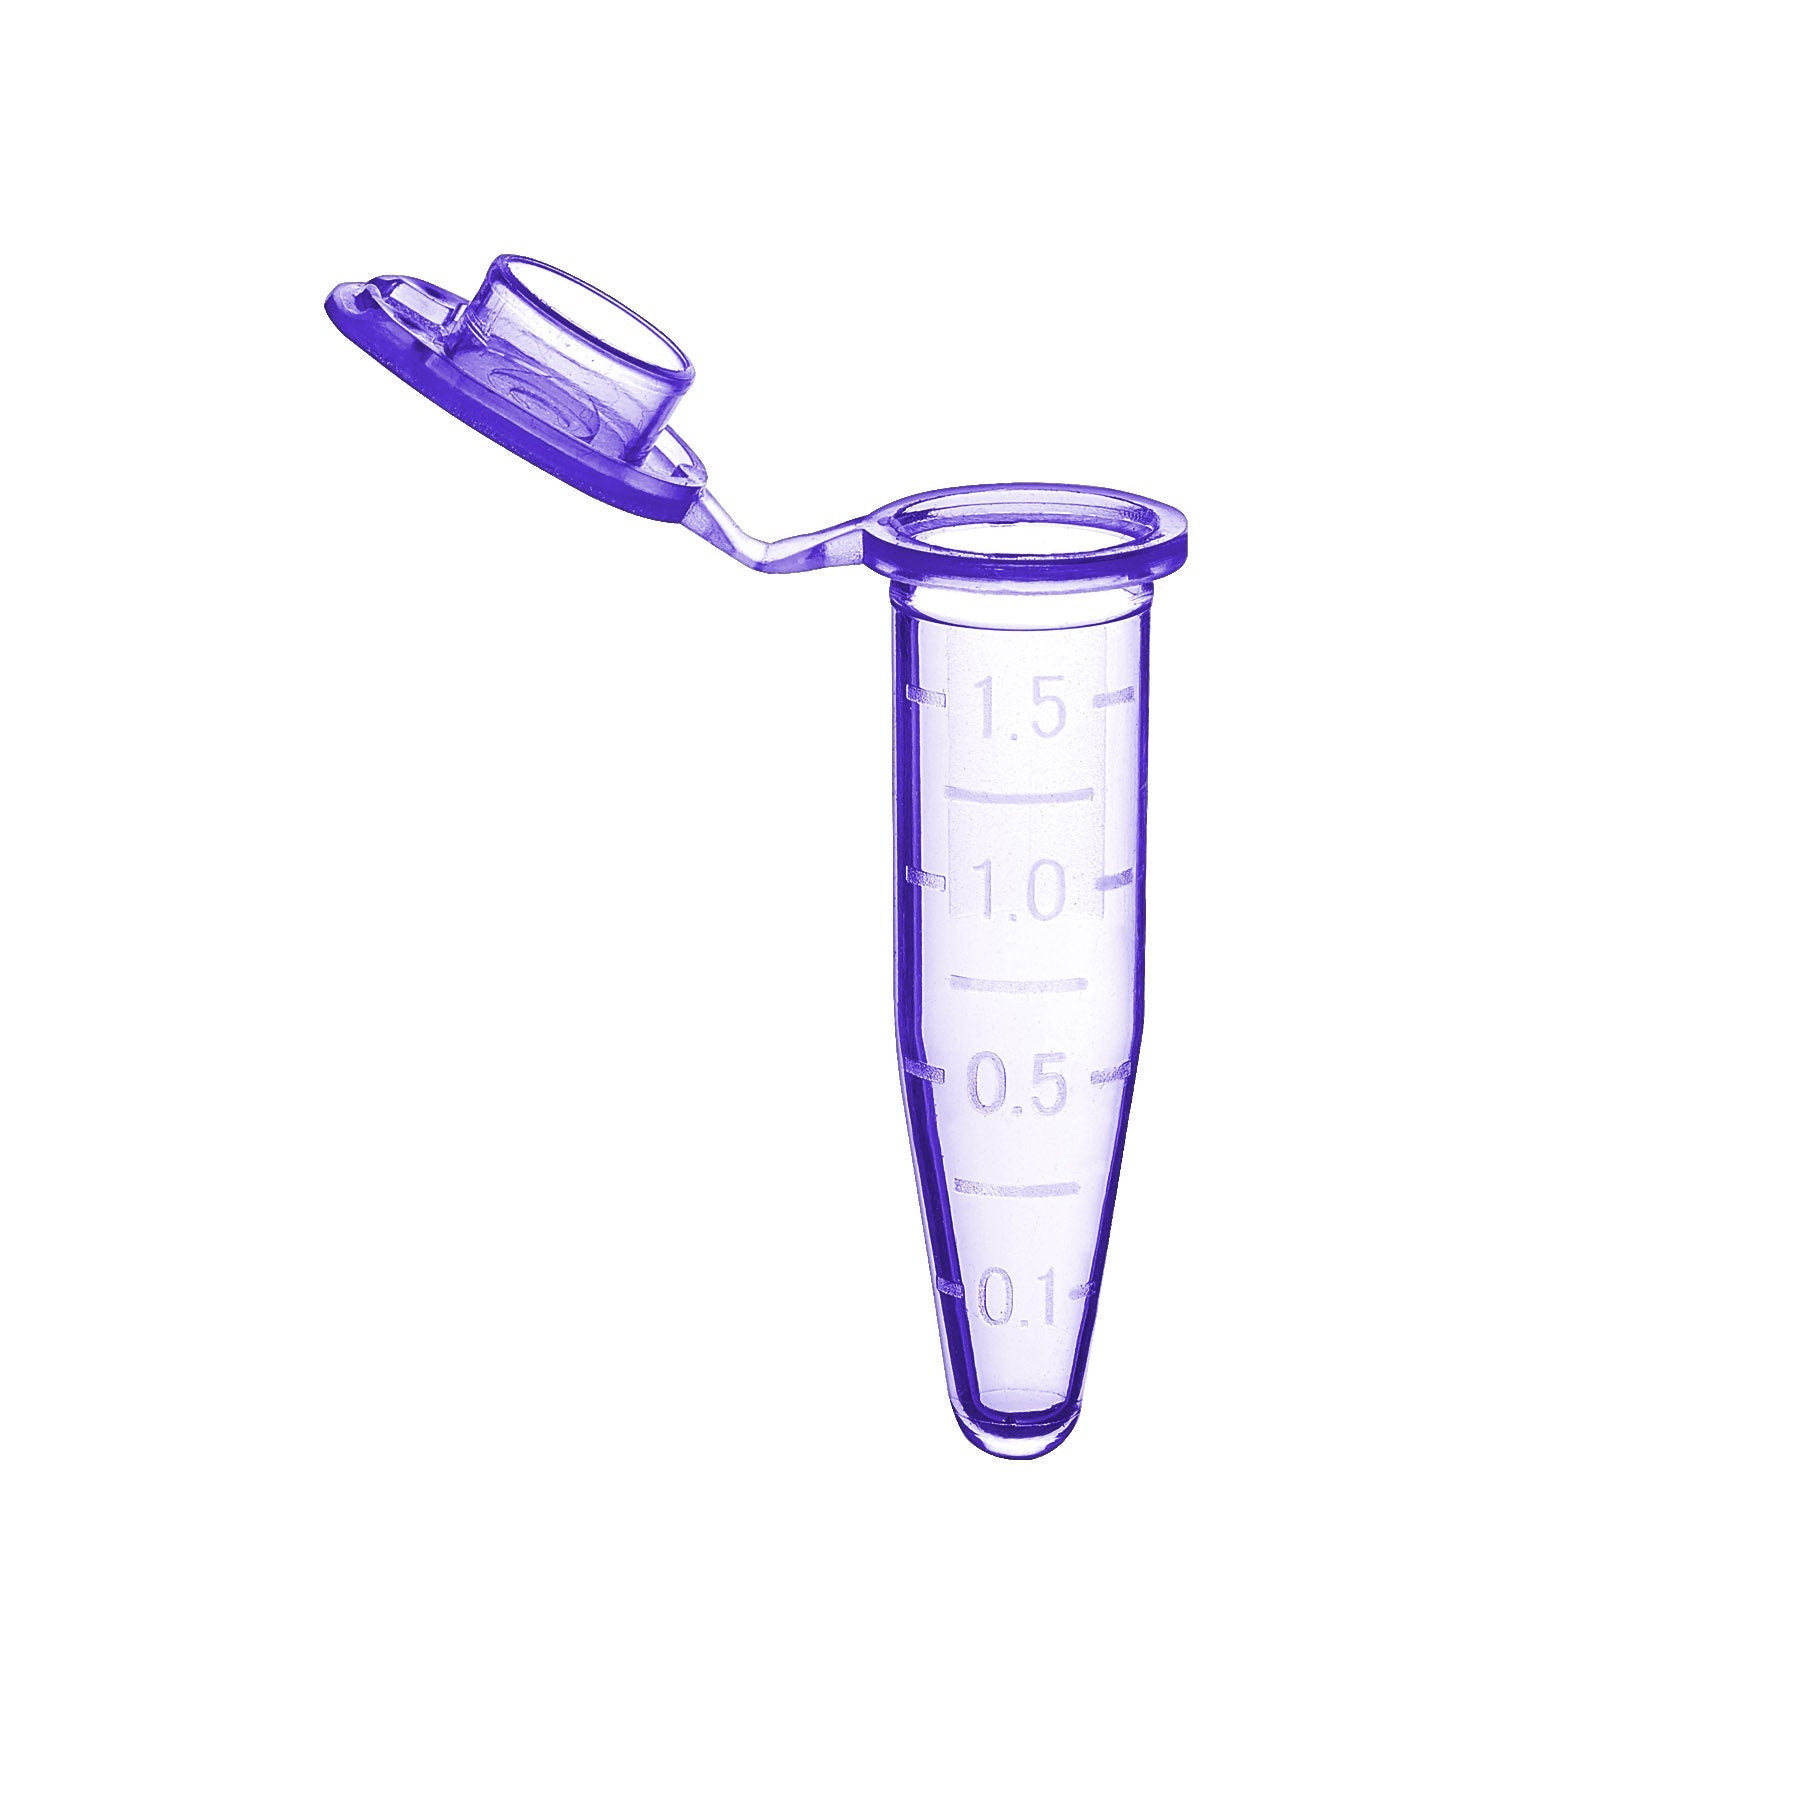 MTC Bio C2000-P, SureSeal Microcentrifuge Tube with Cap, 1.5ml, Purple, Sterile, with Self-Standing Bag & Stop-Pops, 500/pk